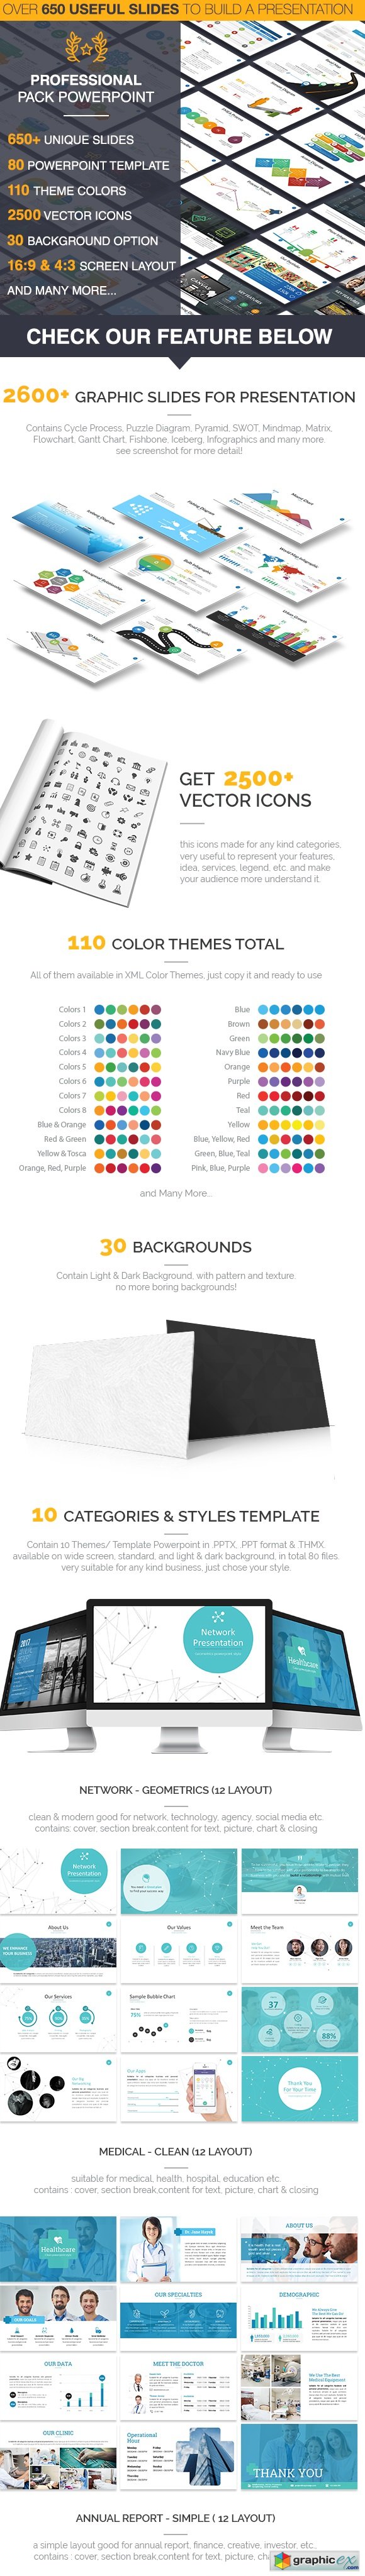 Powerpoint Template Professional Pack